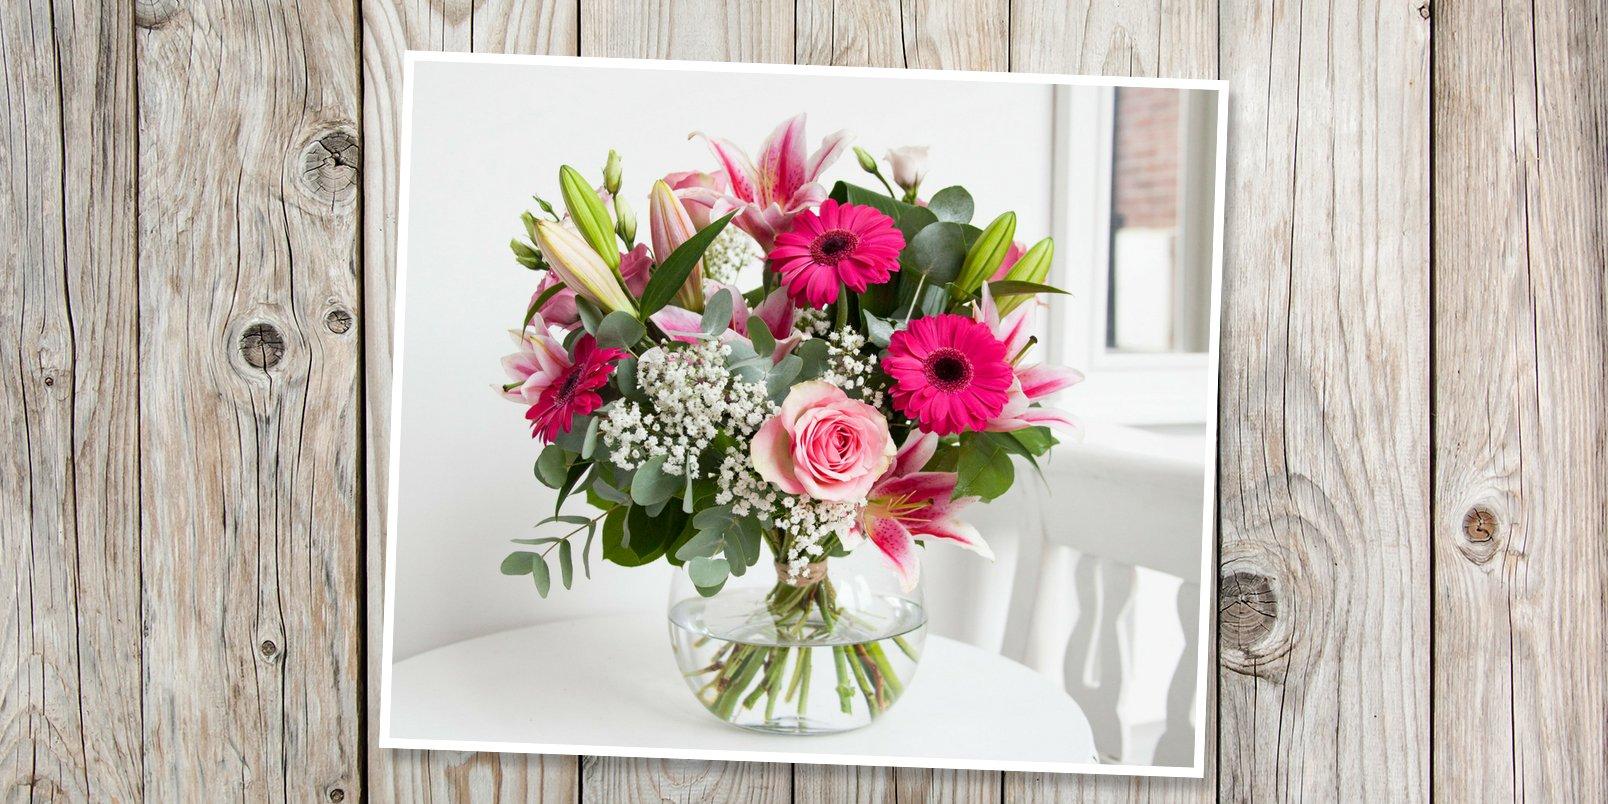 How to choose the right vase for your bouquet of flowers – 3 tips